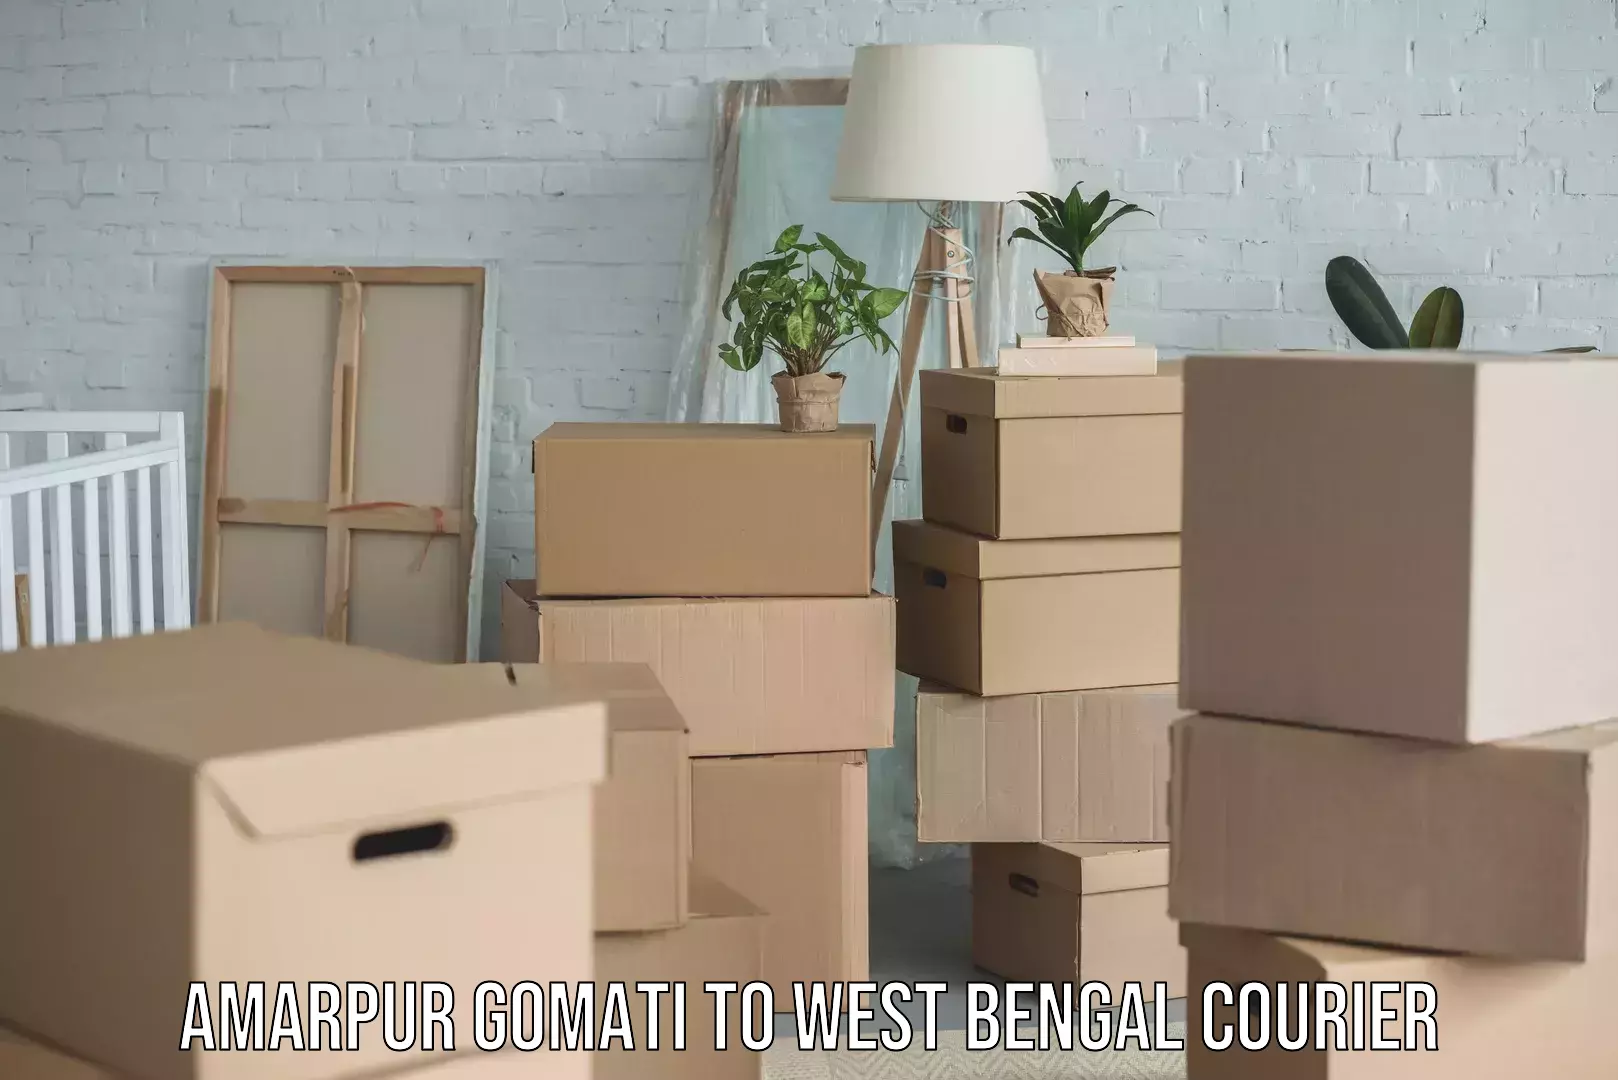 Courier service partnerships Amarpur Gomati to West Bengal